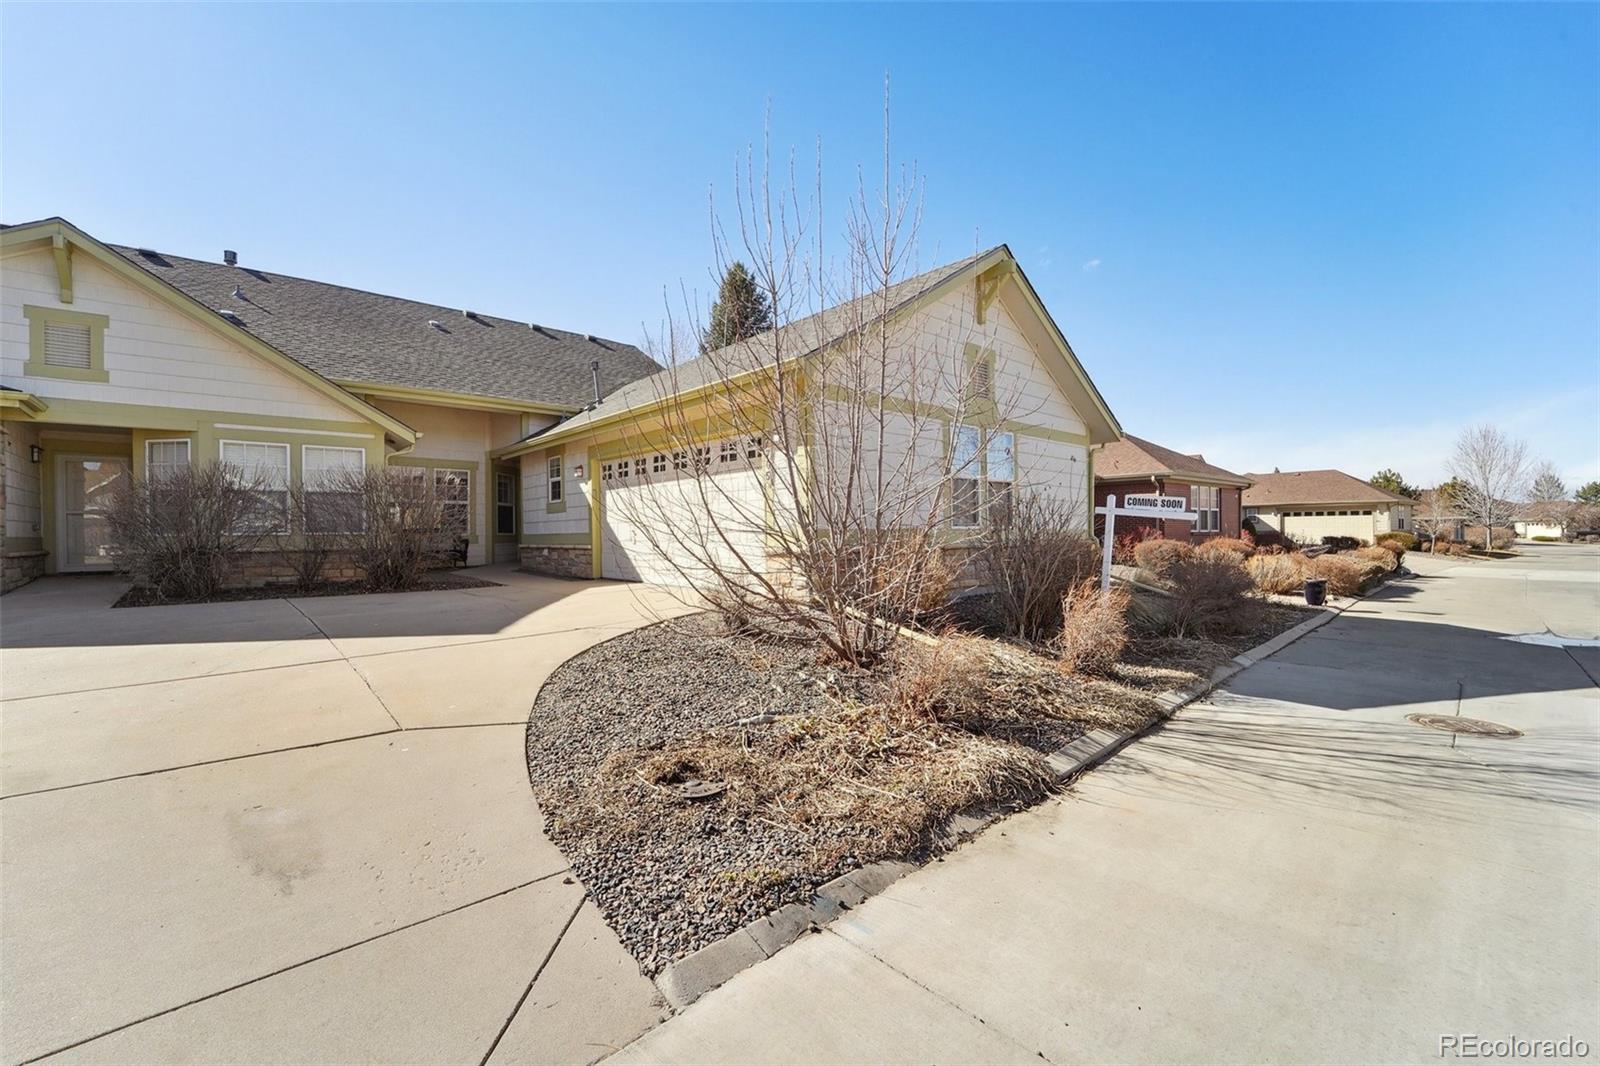 7705 s biloxi way, Aurora sold home. Closed on 2024-03-25 for $548,000.